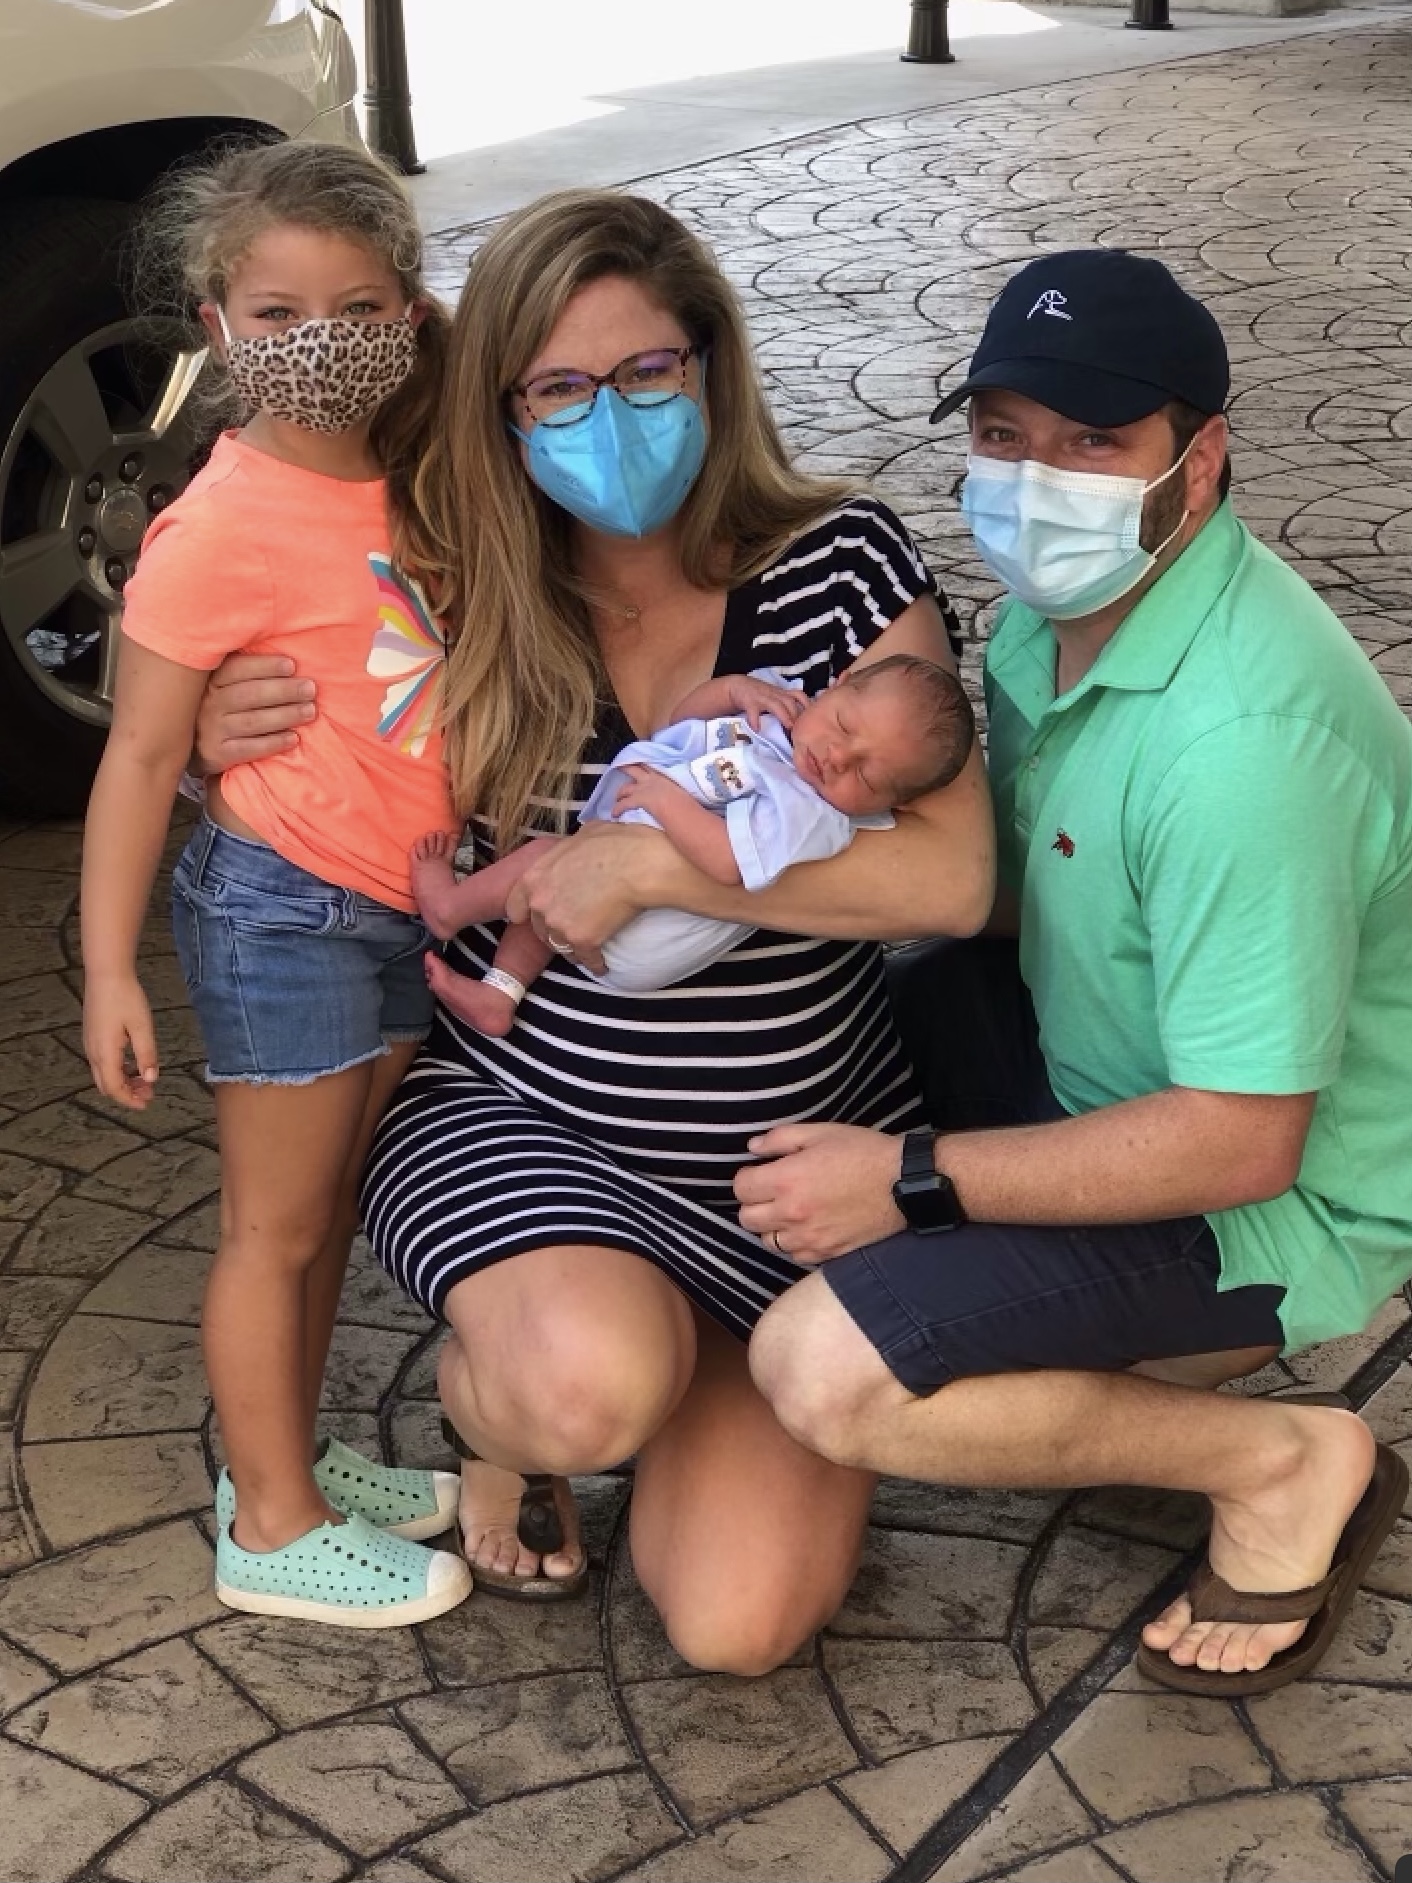 The Friedmann family poses for a family photo soon after their youngest is born at The Baby Place at AdventHealth Winter Park, Florida.